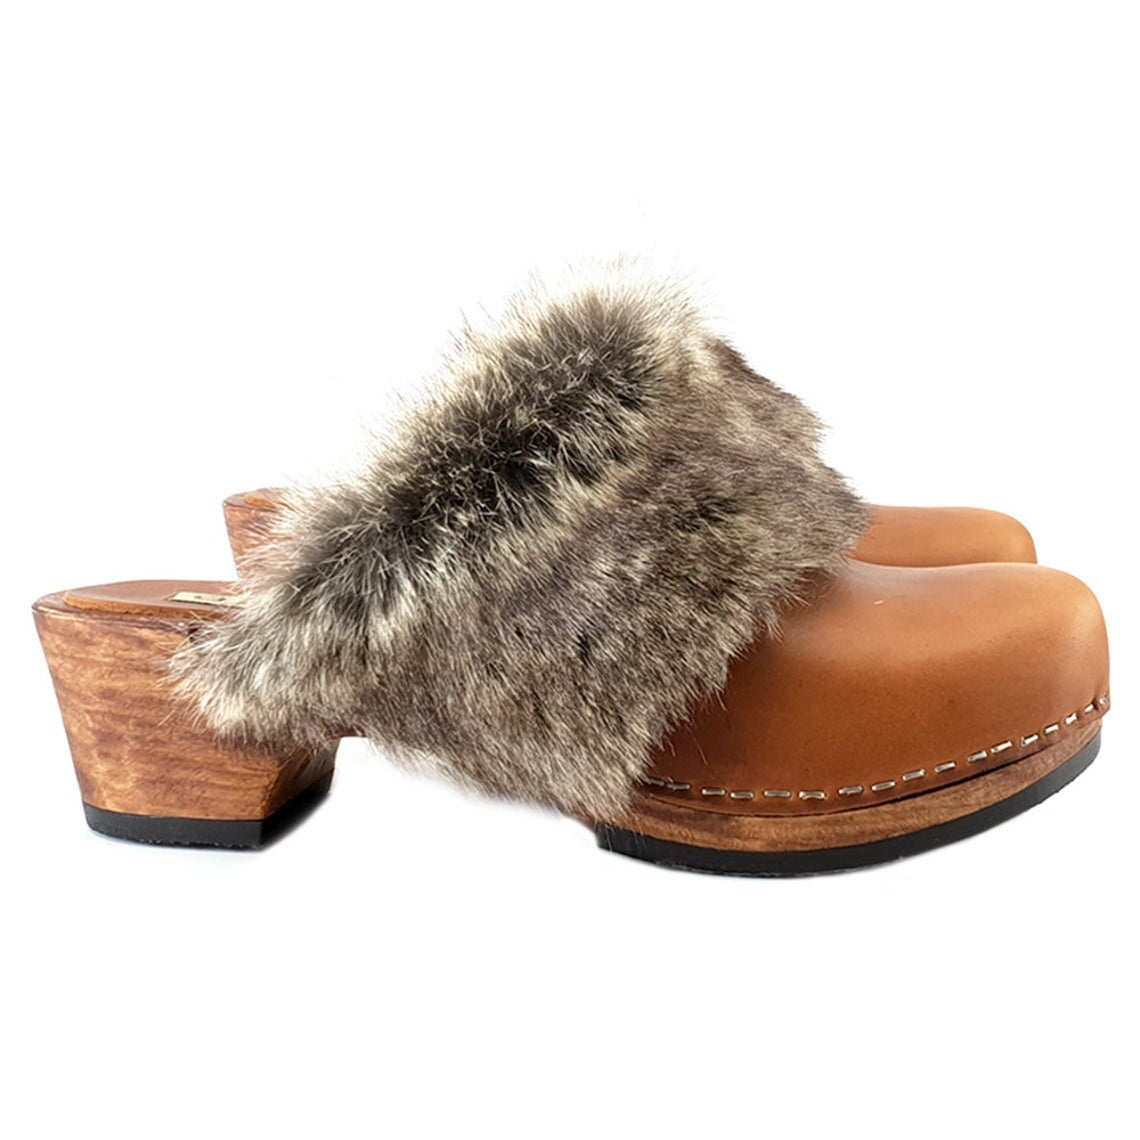 winter clogs with fur